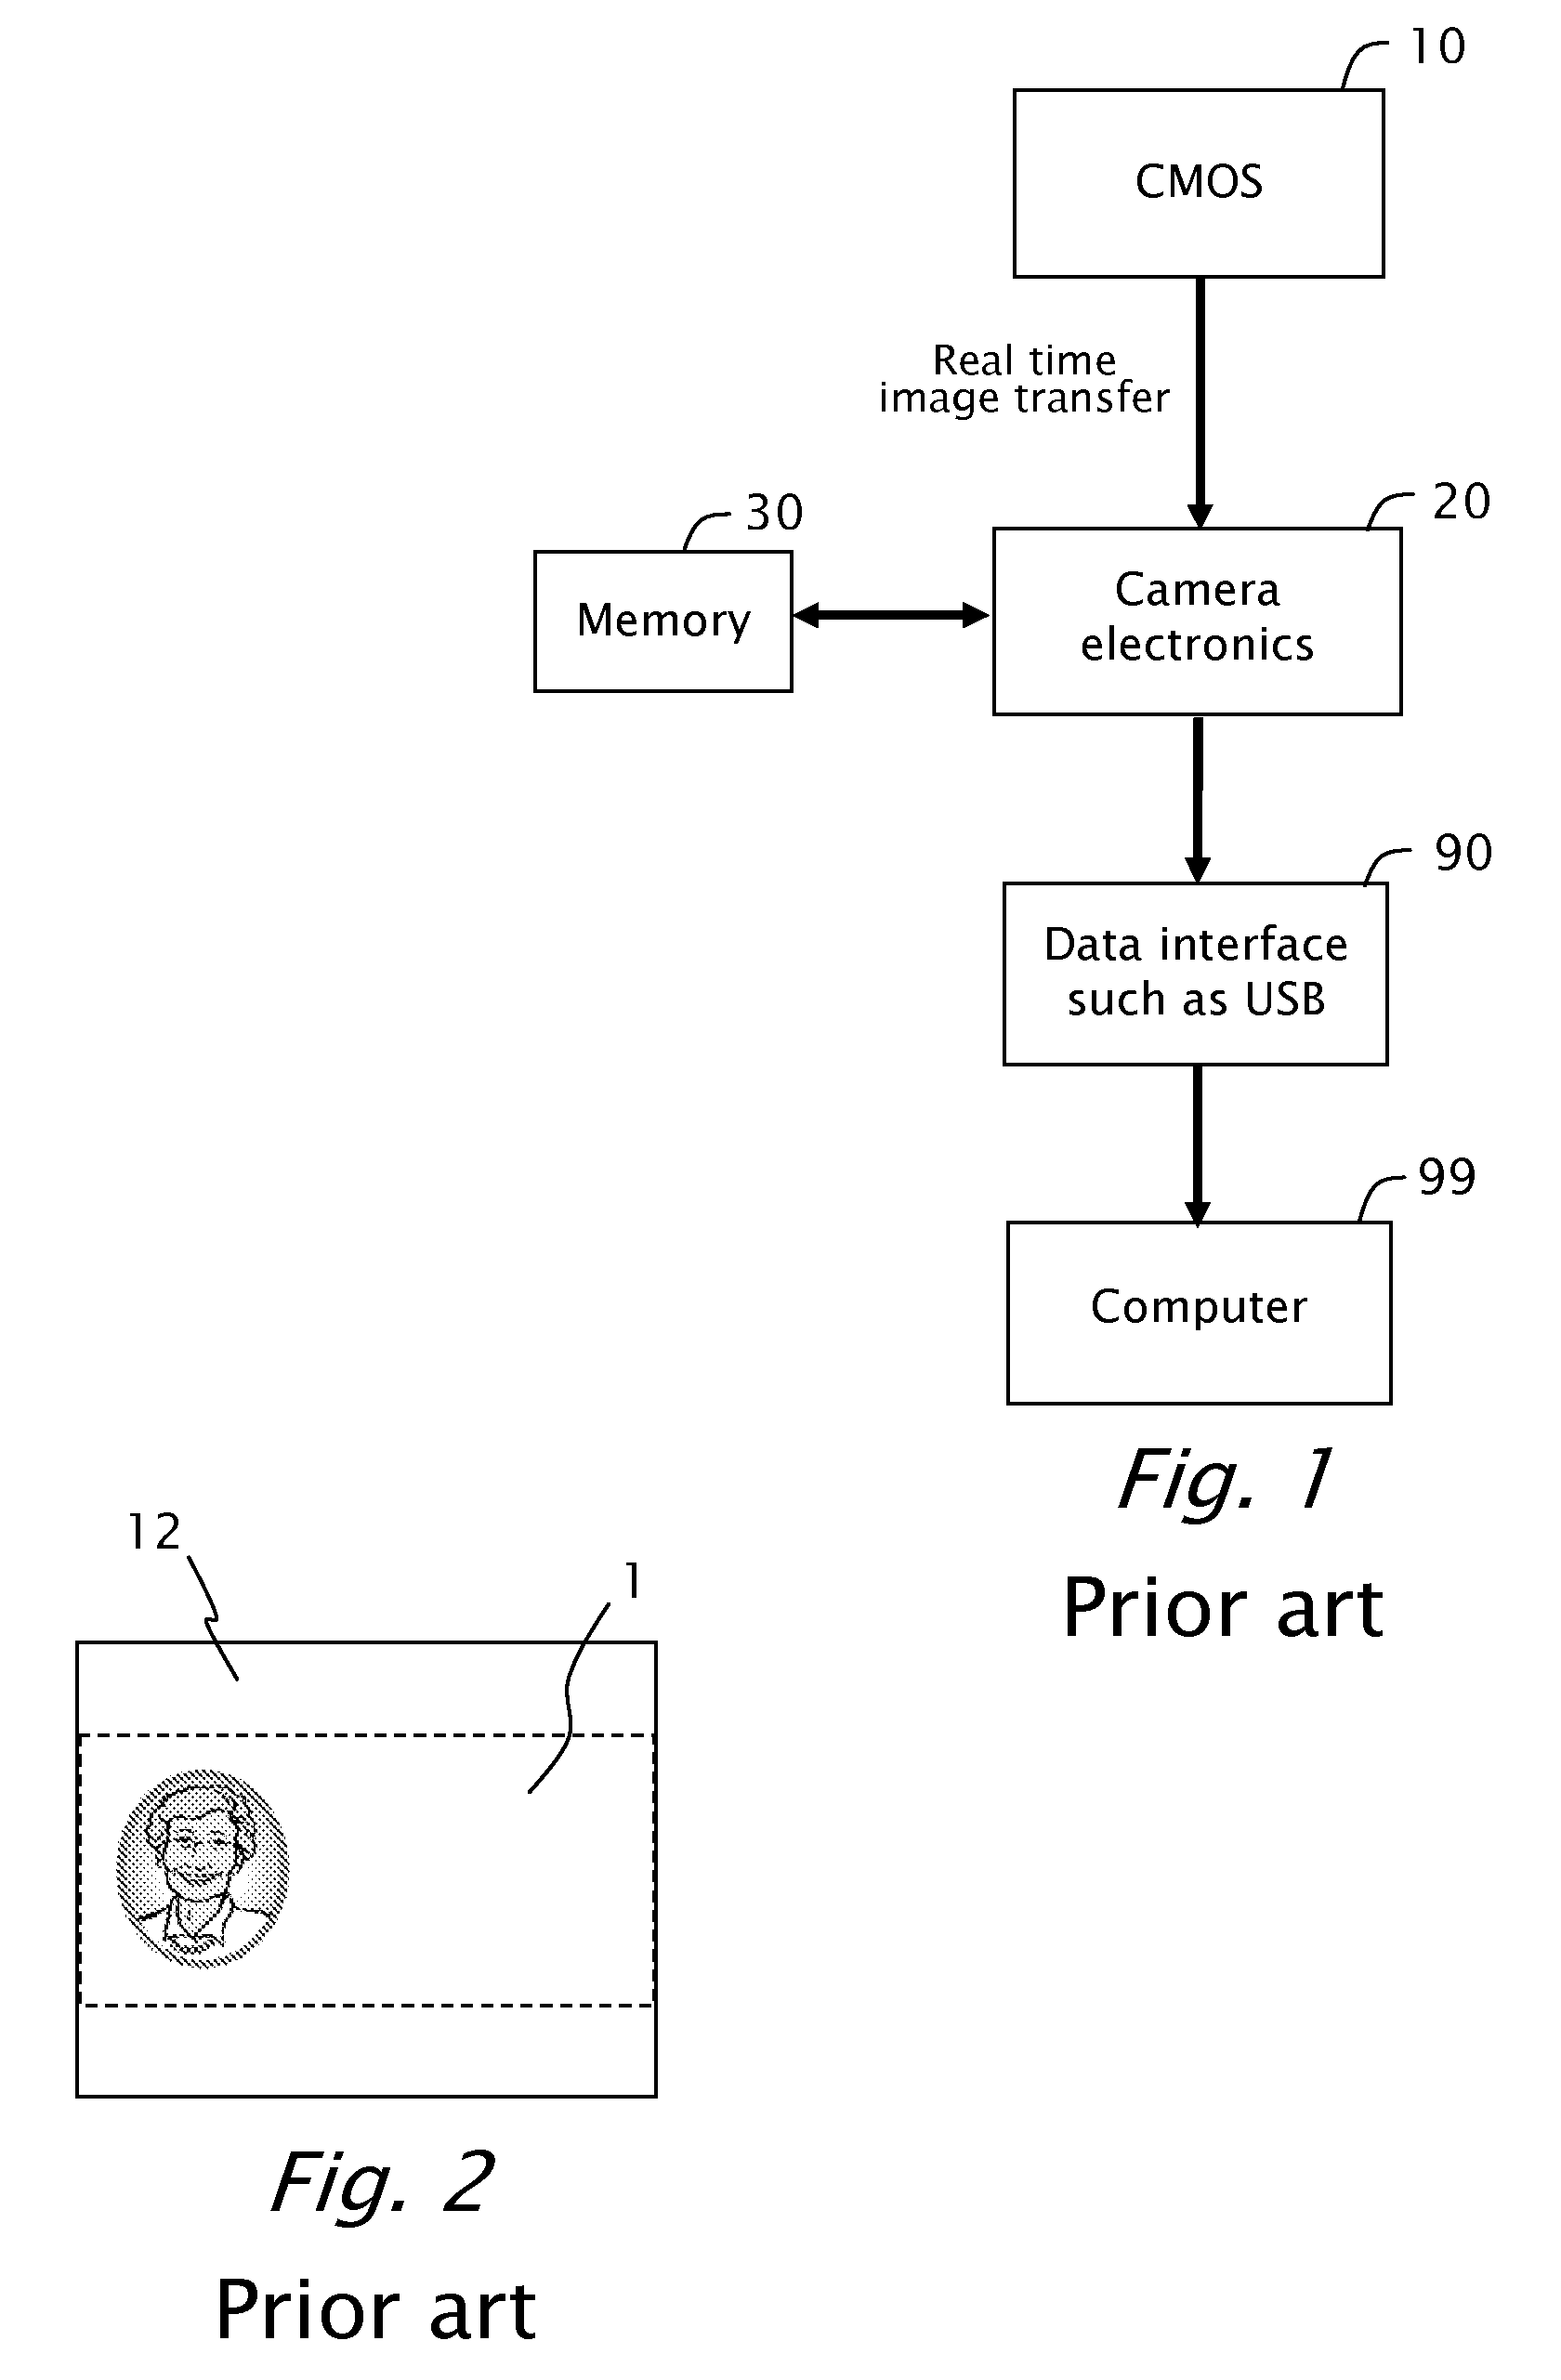 System and method for electronically combining images taken by two or more adjacent image sensors